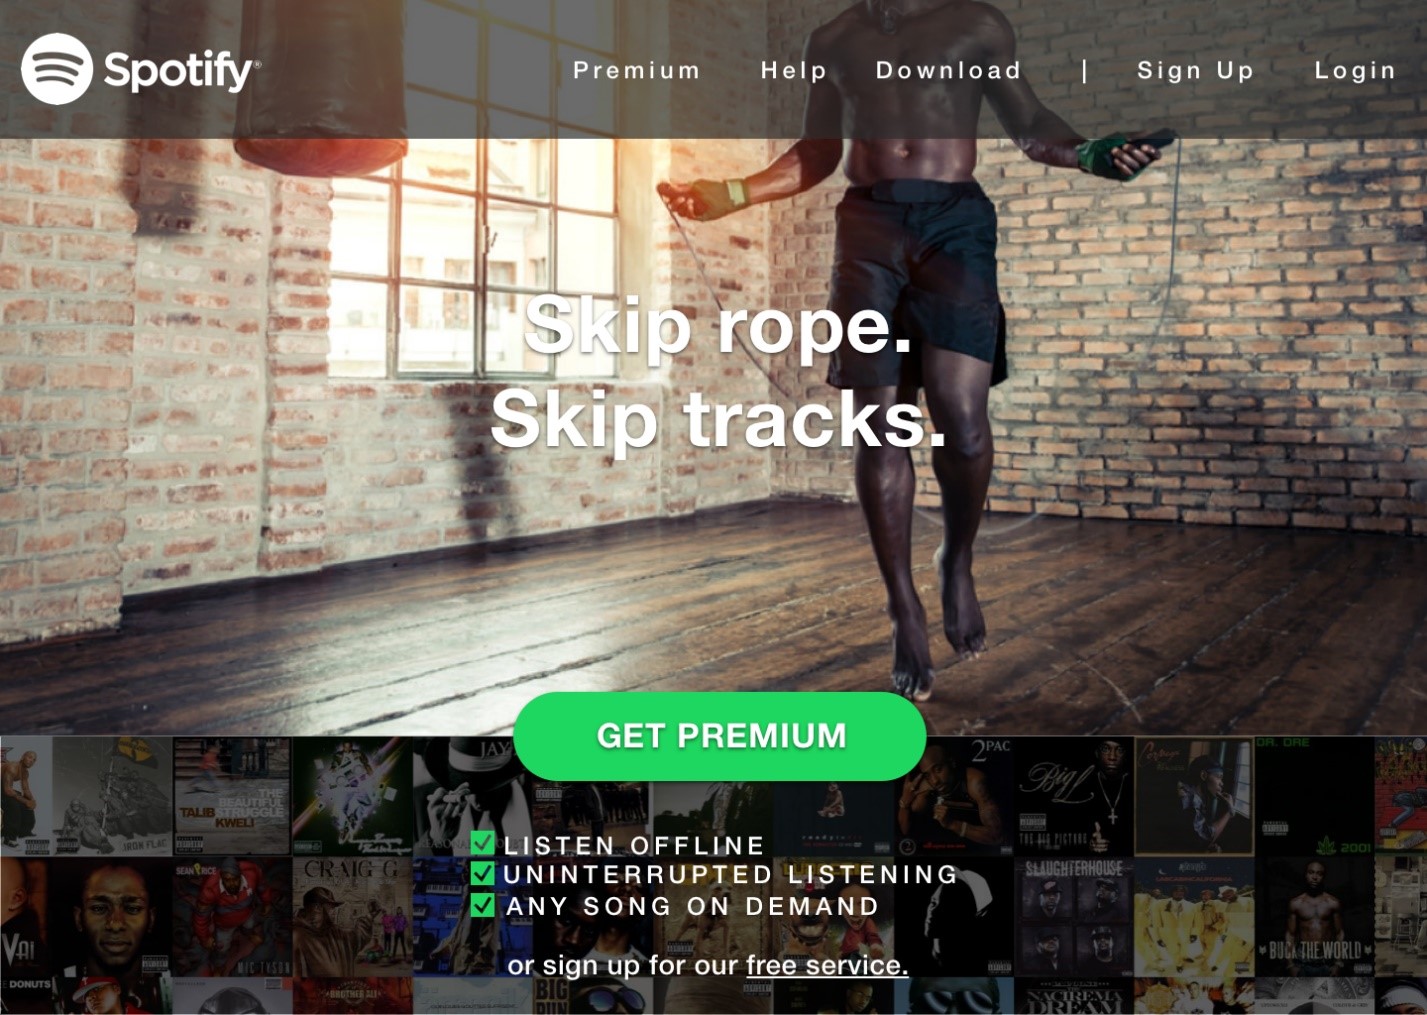 Spotify landing page with large button saying Get Premium and smaller link to free service.